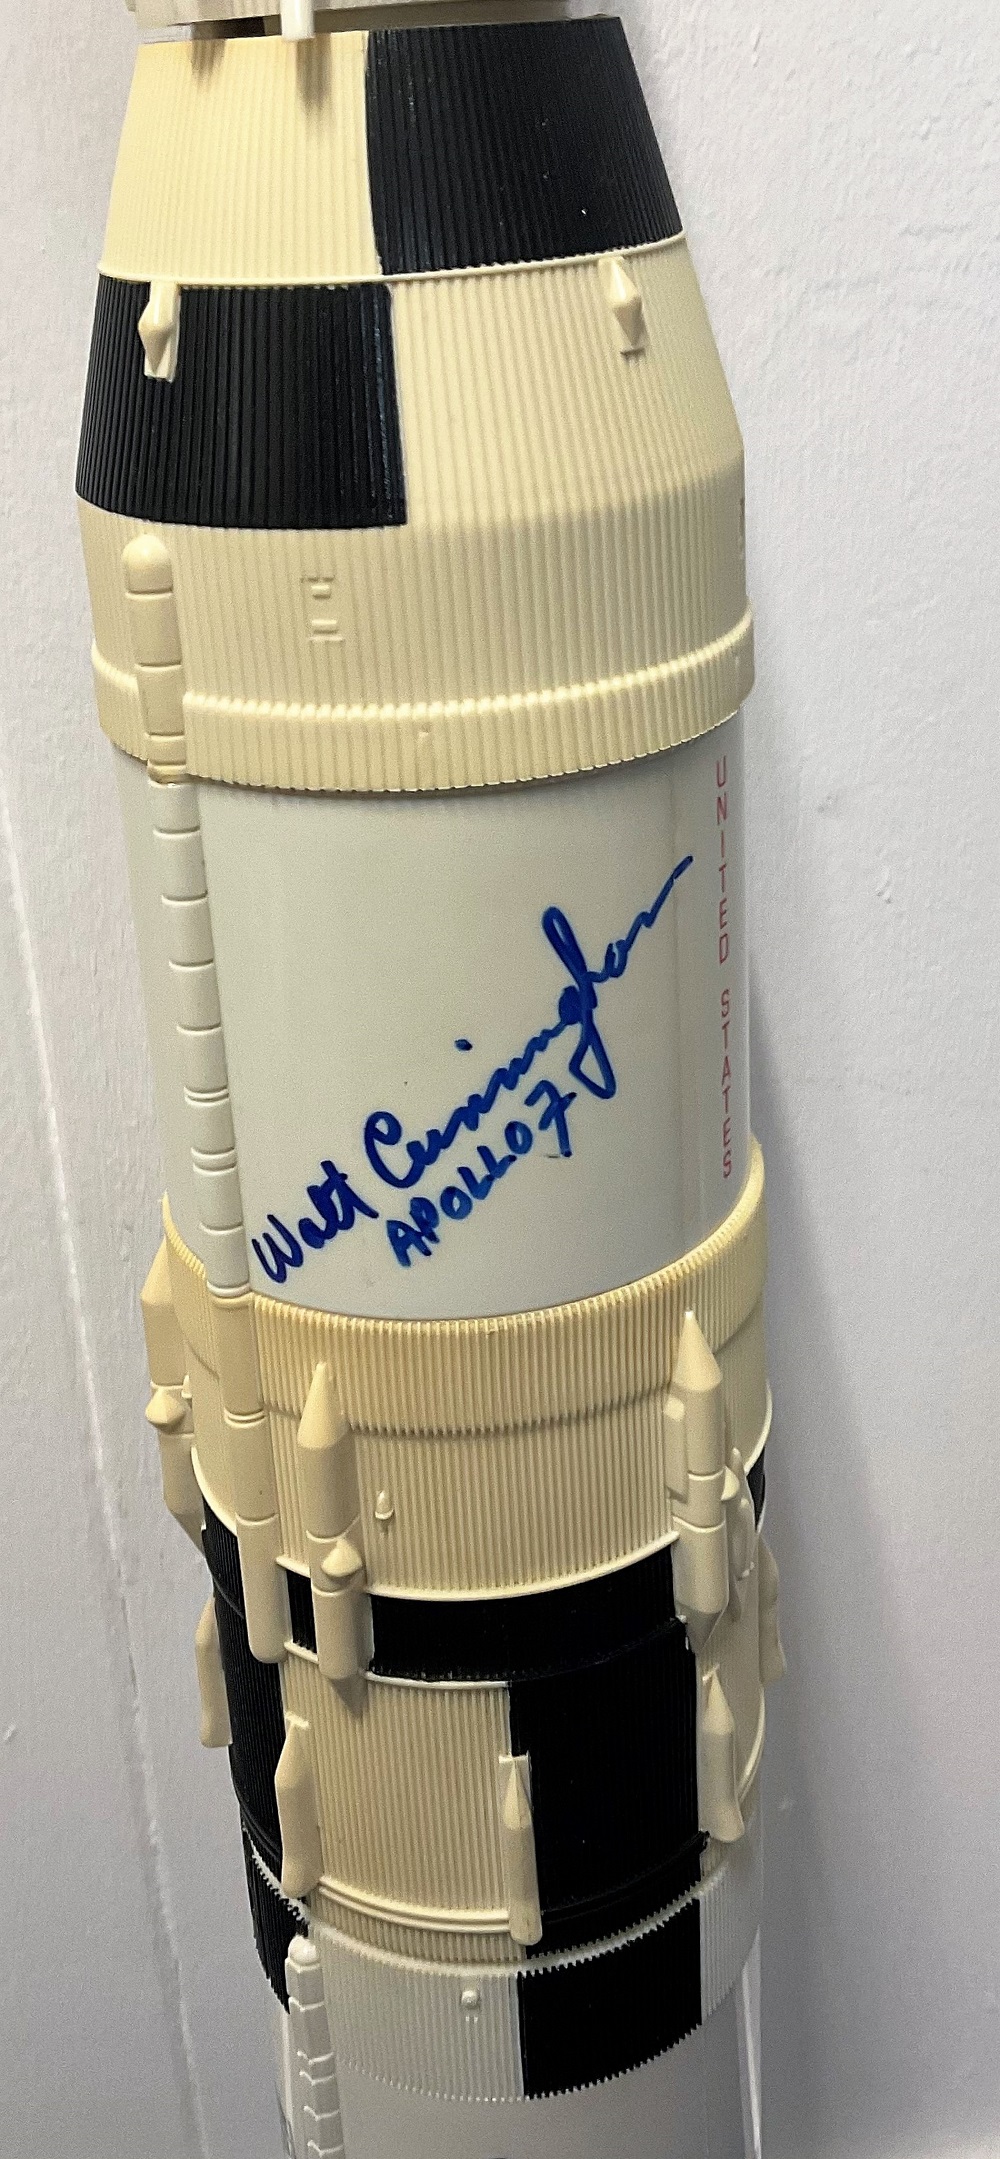 Space Voyagers Saturn 5 rocket model multi signed by Nasa astronauts Charles Drake, Ed Mitchell, - Image 2 of 7